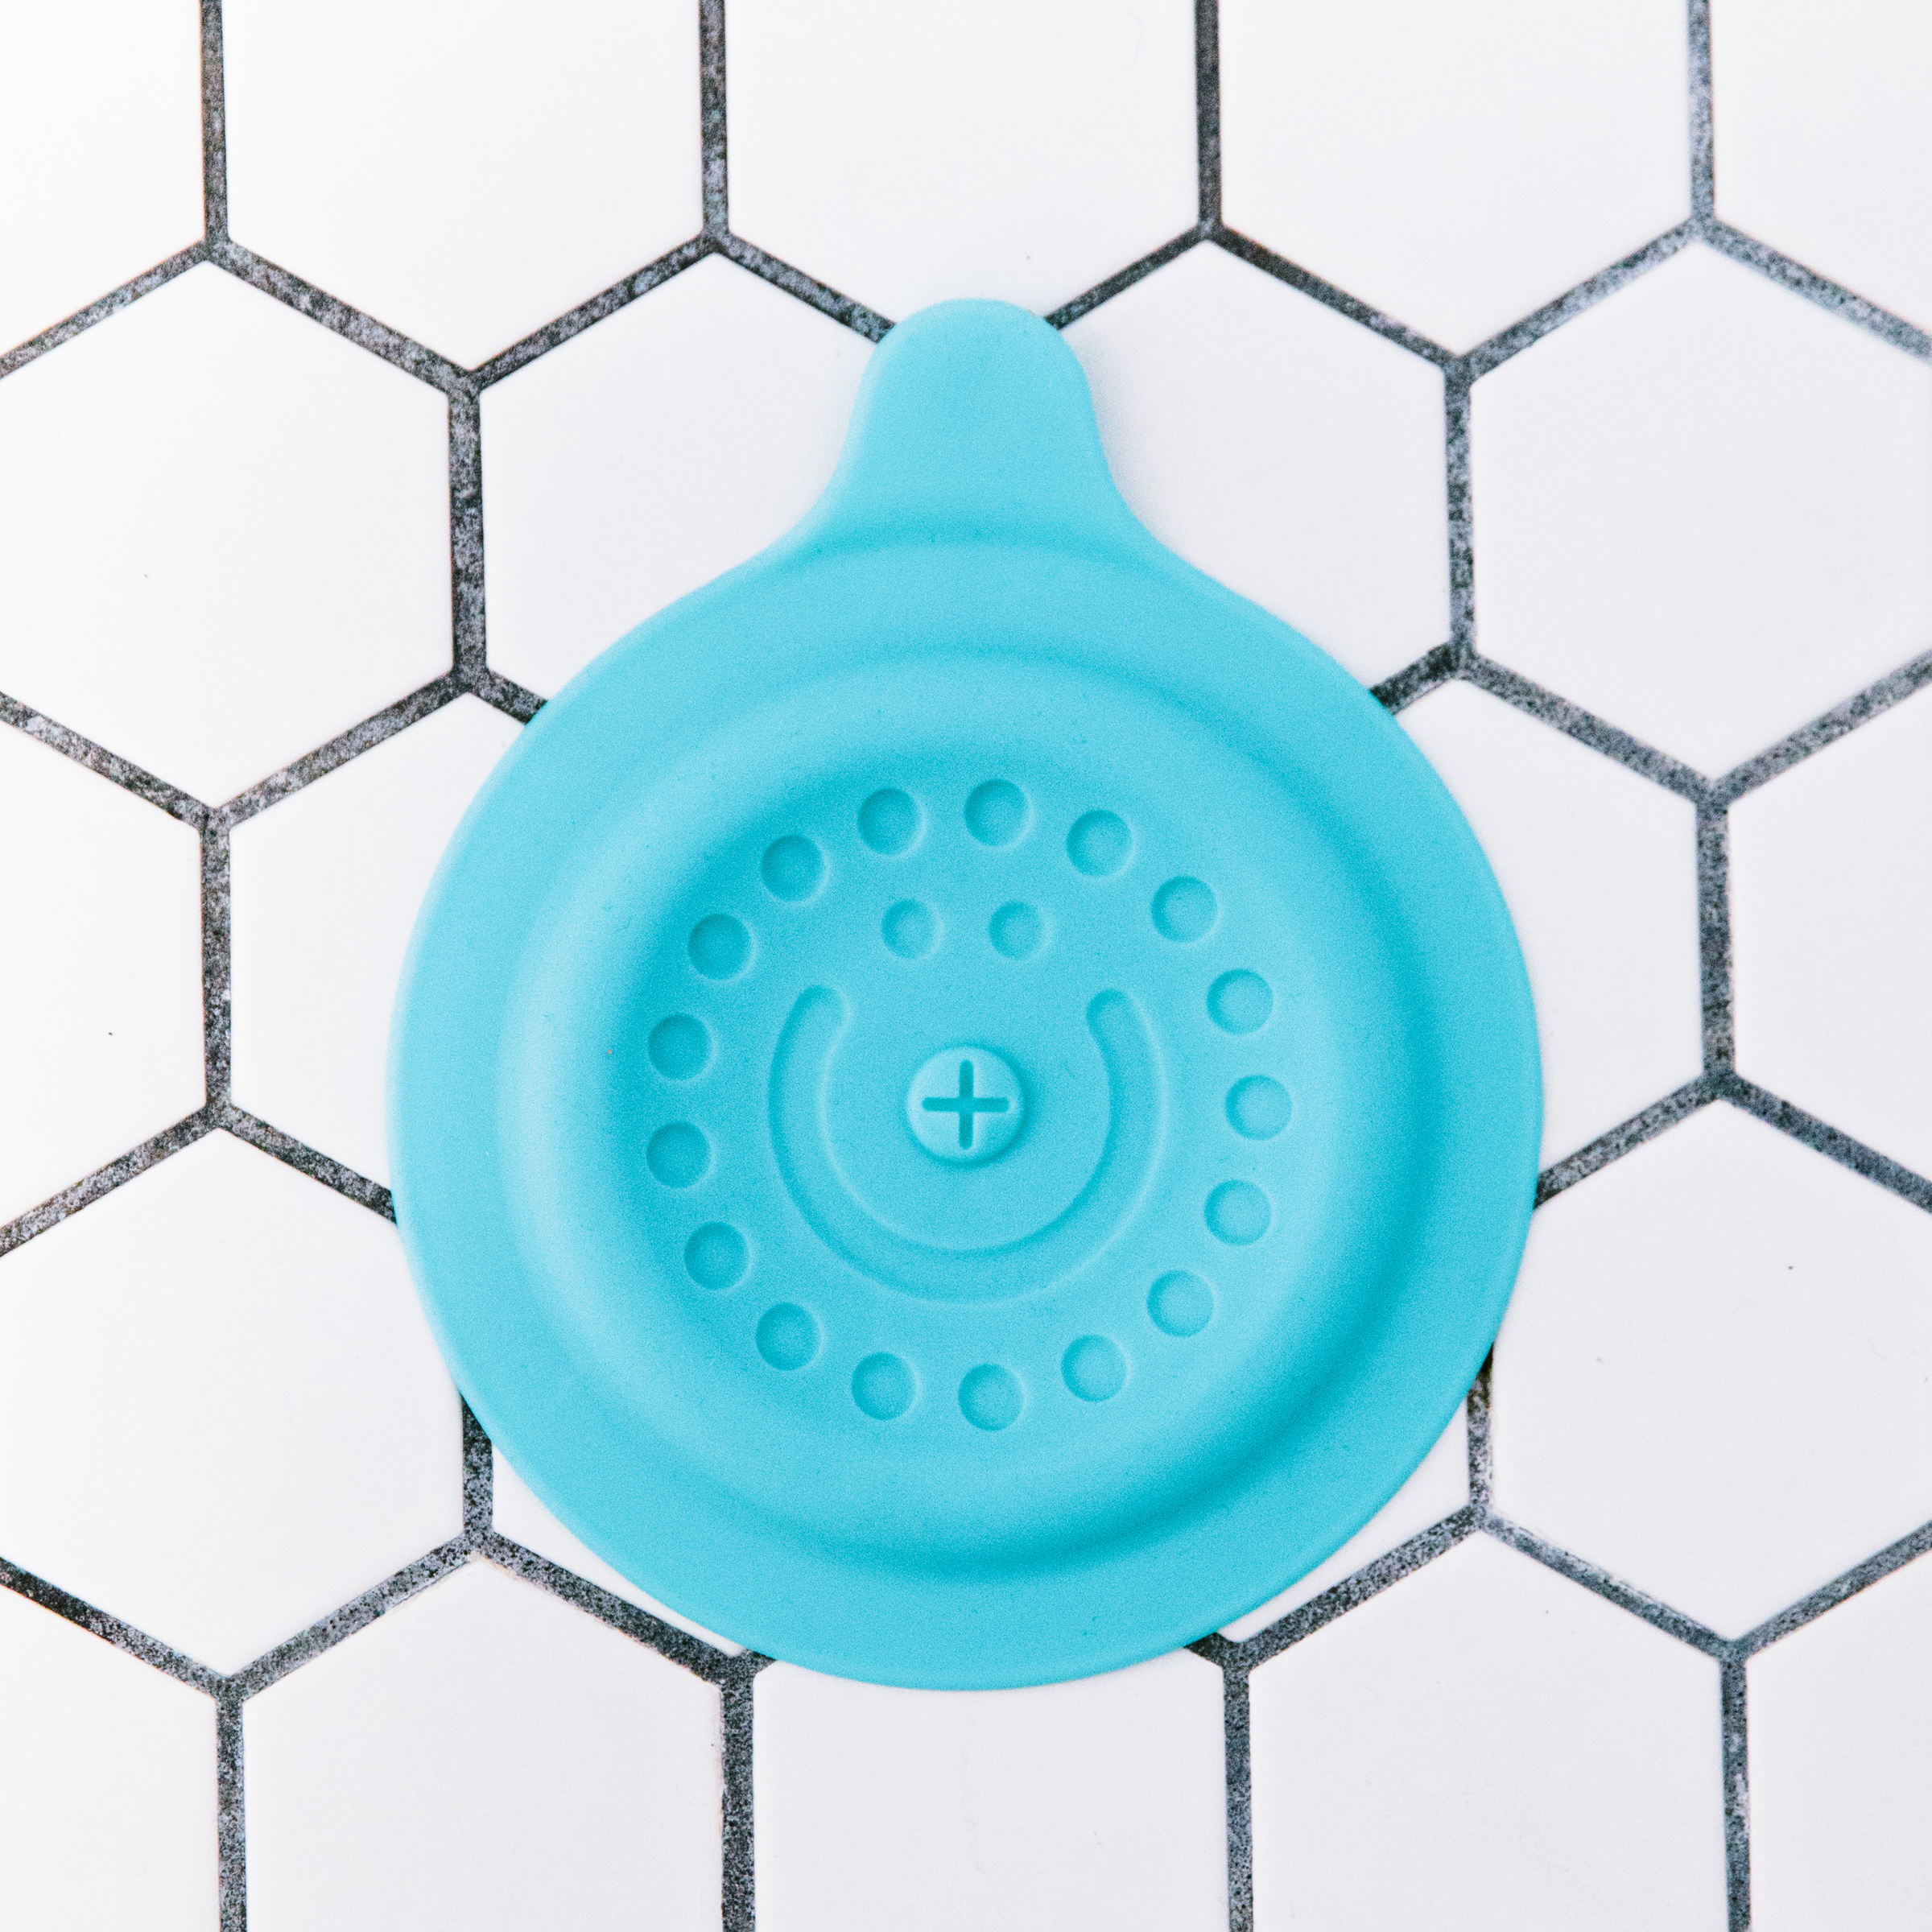 Ubbi Baby Bath Drain Cover, Bathtub Stopper for Baby, Toddlers and  Children, Blue, silicone, inch height